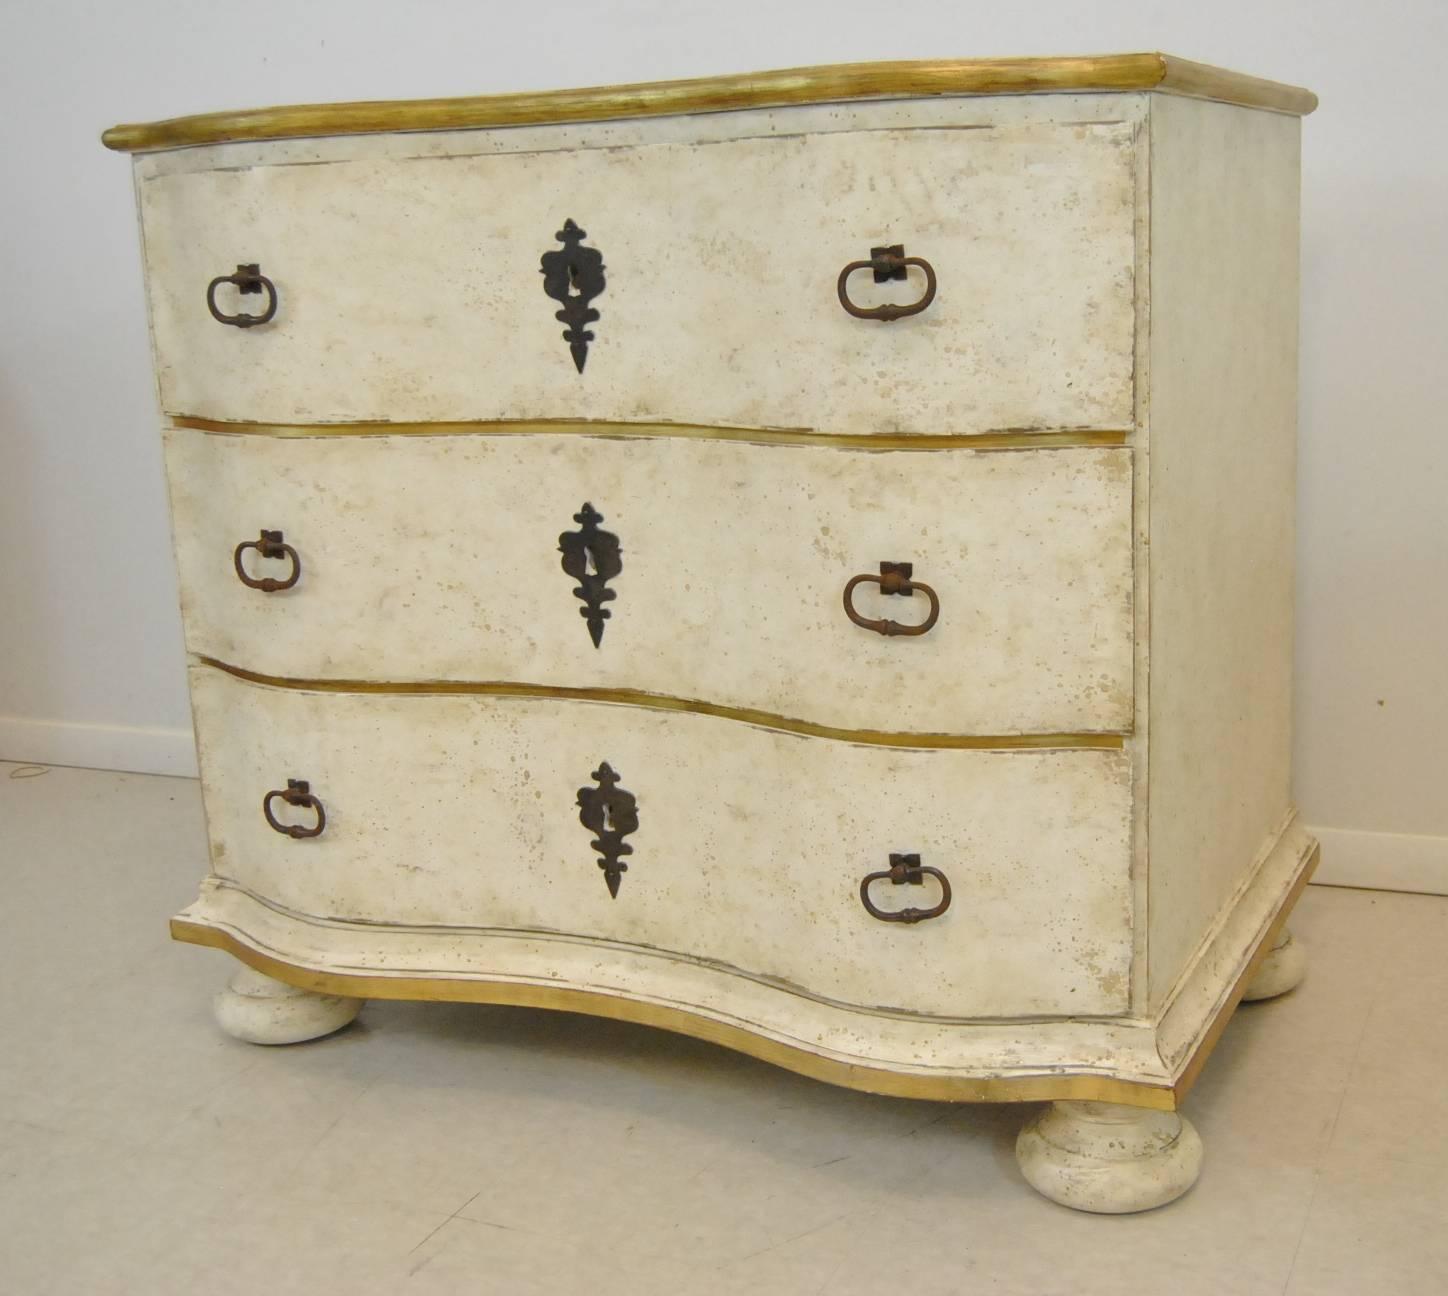 A stunning pair of French style serpentine commodes by Amy Howard. handcrafted and hand-painted in an antique white with gold trim and a wood top. These three drawer chests offer light elegant style and ample storage.